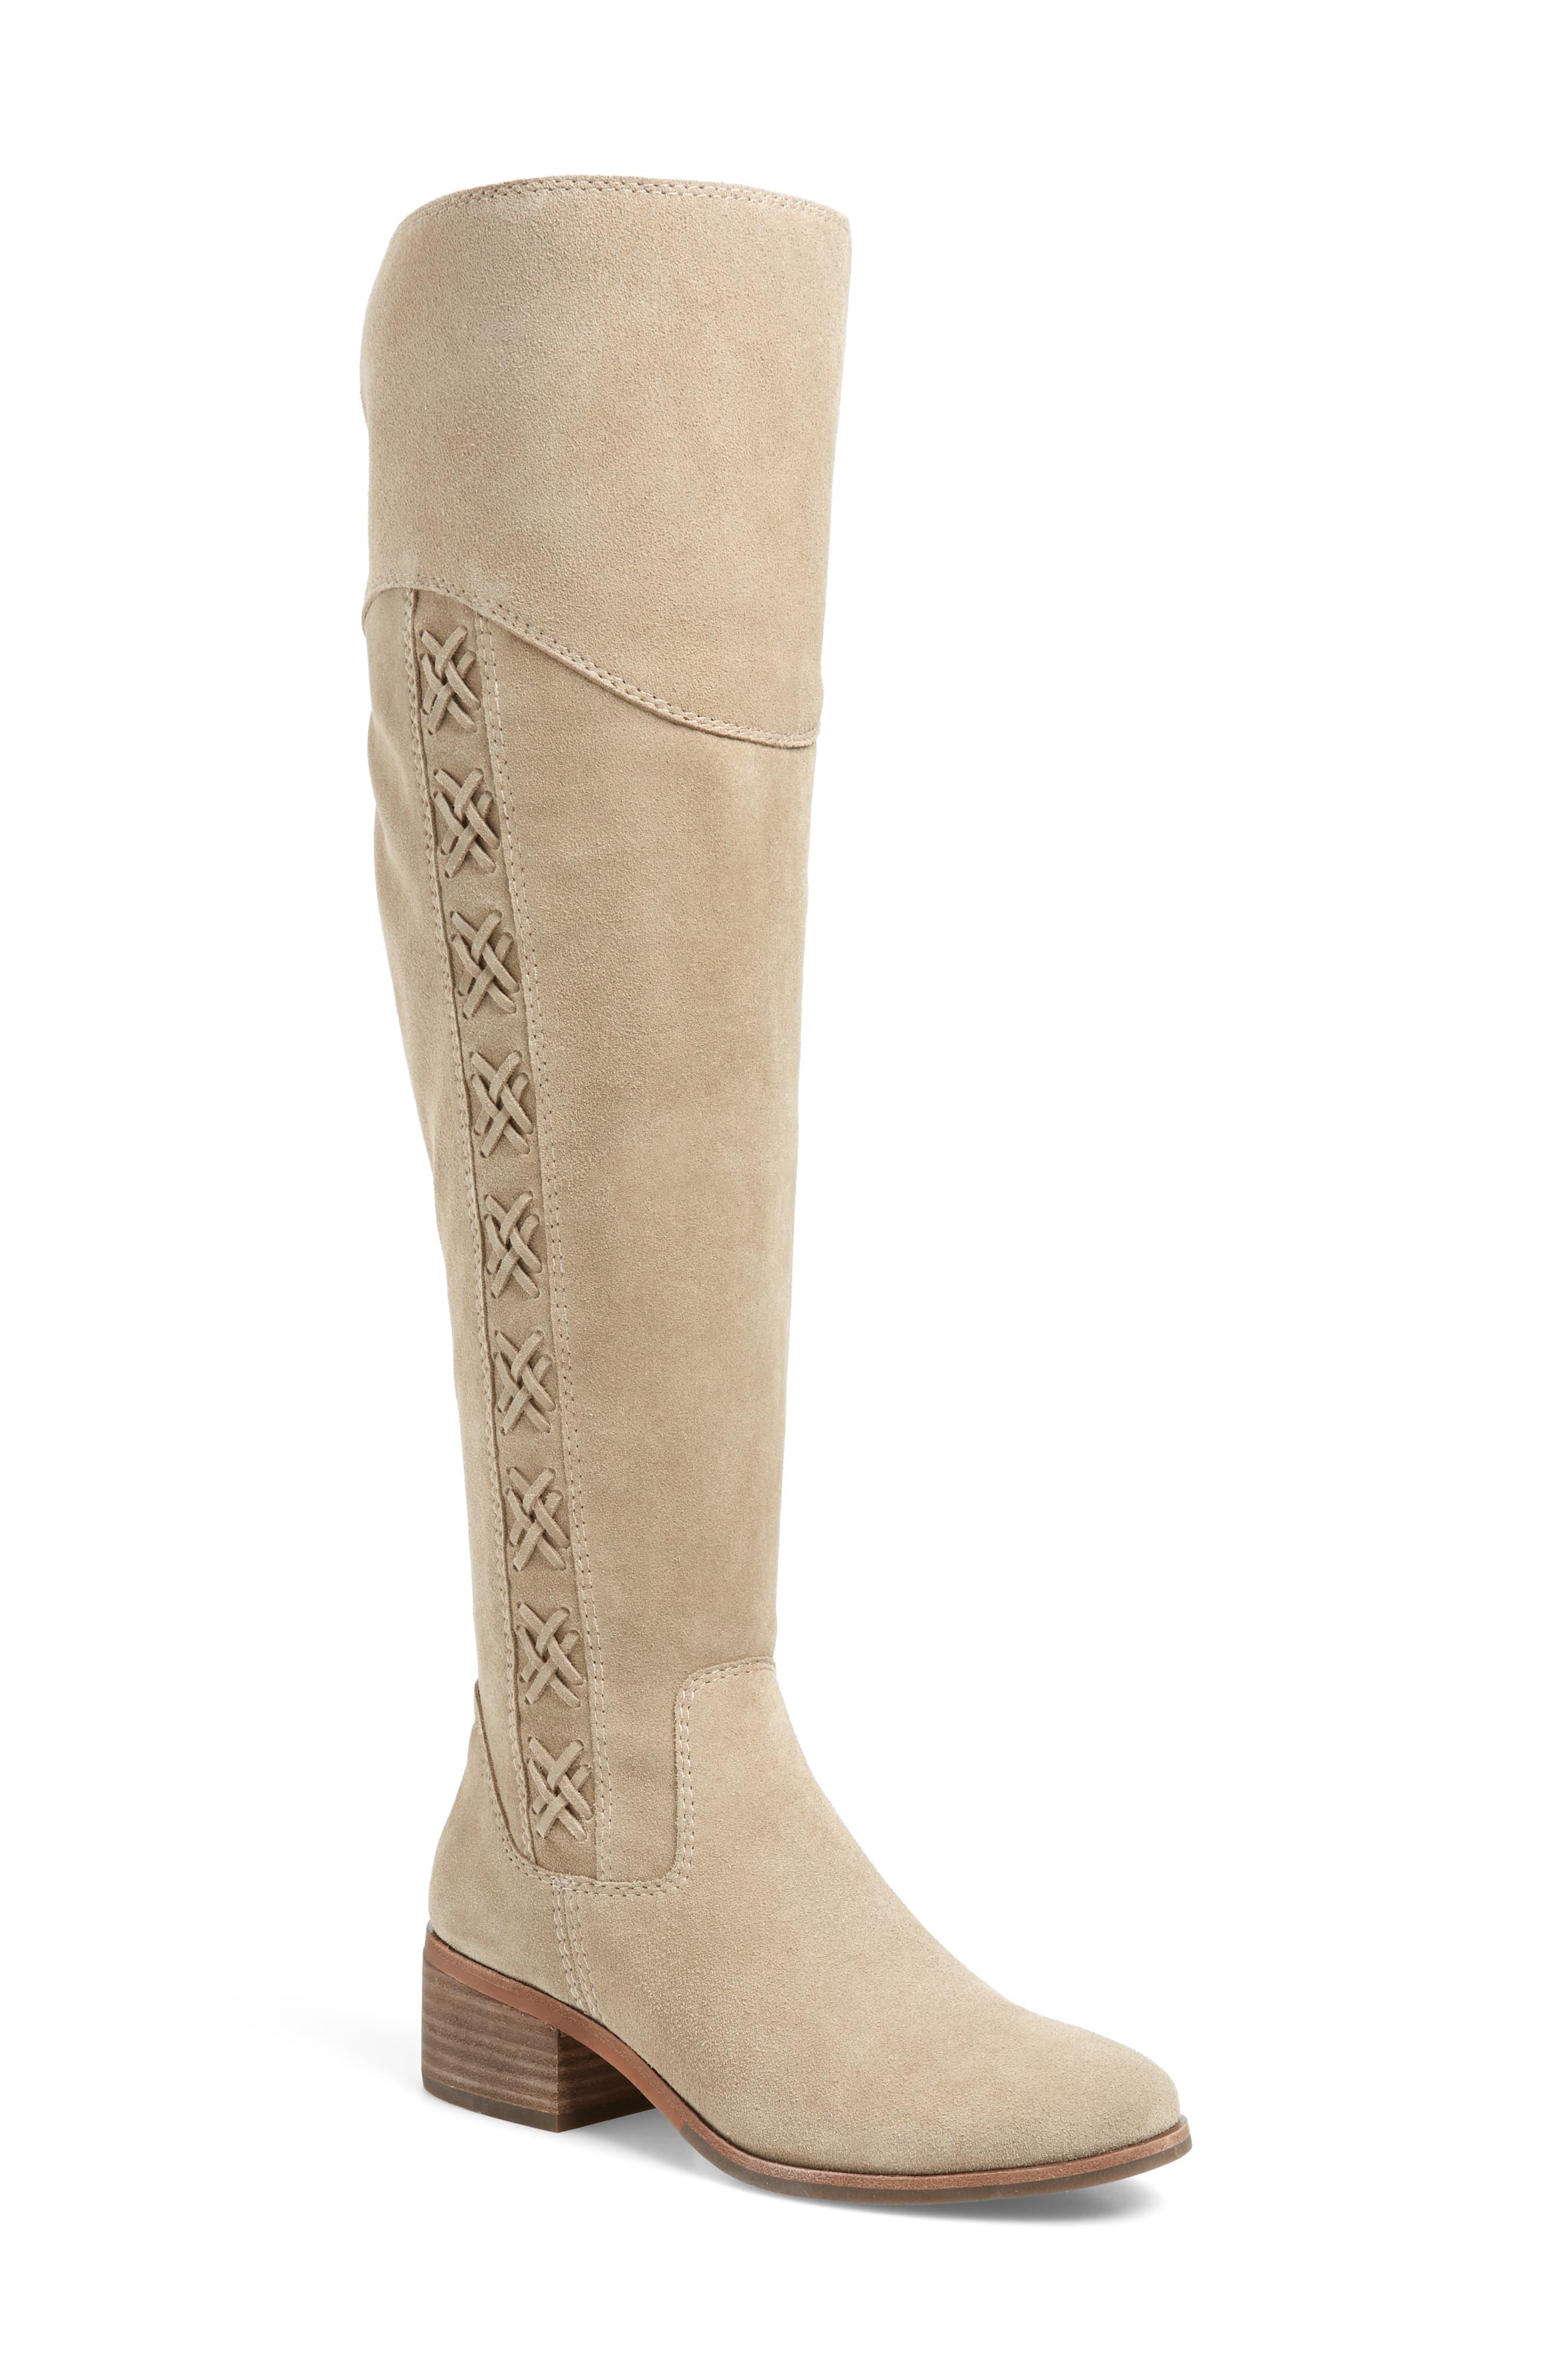 Vince Camuto KREESELL2 Wide Calf Over 